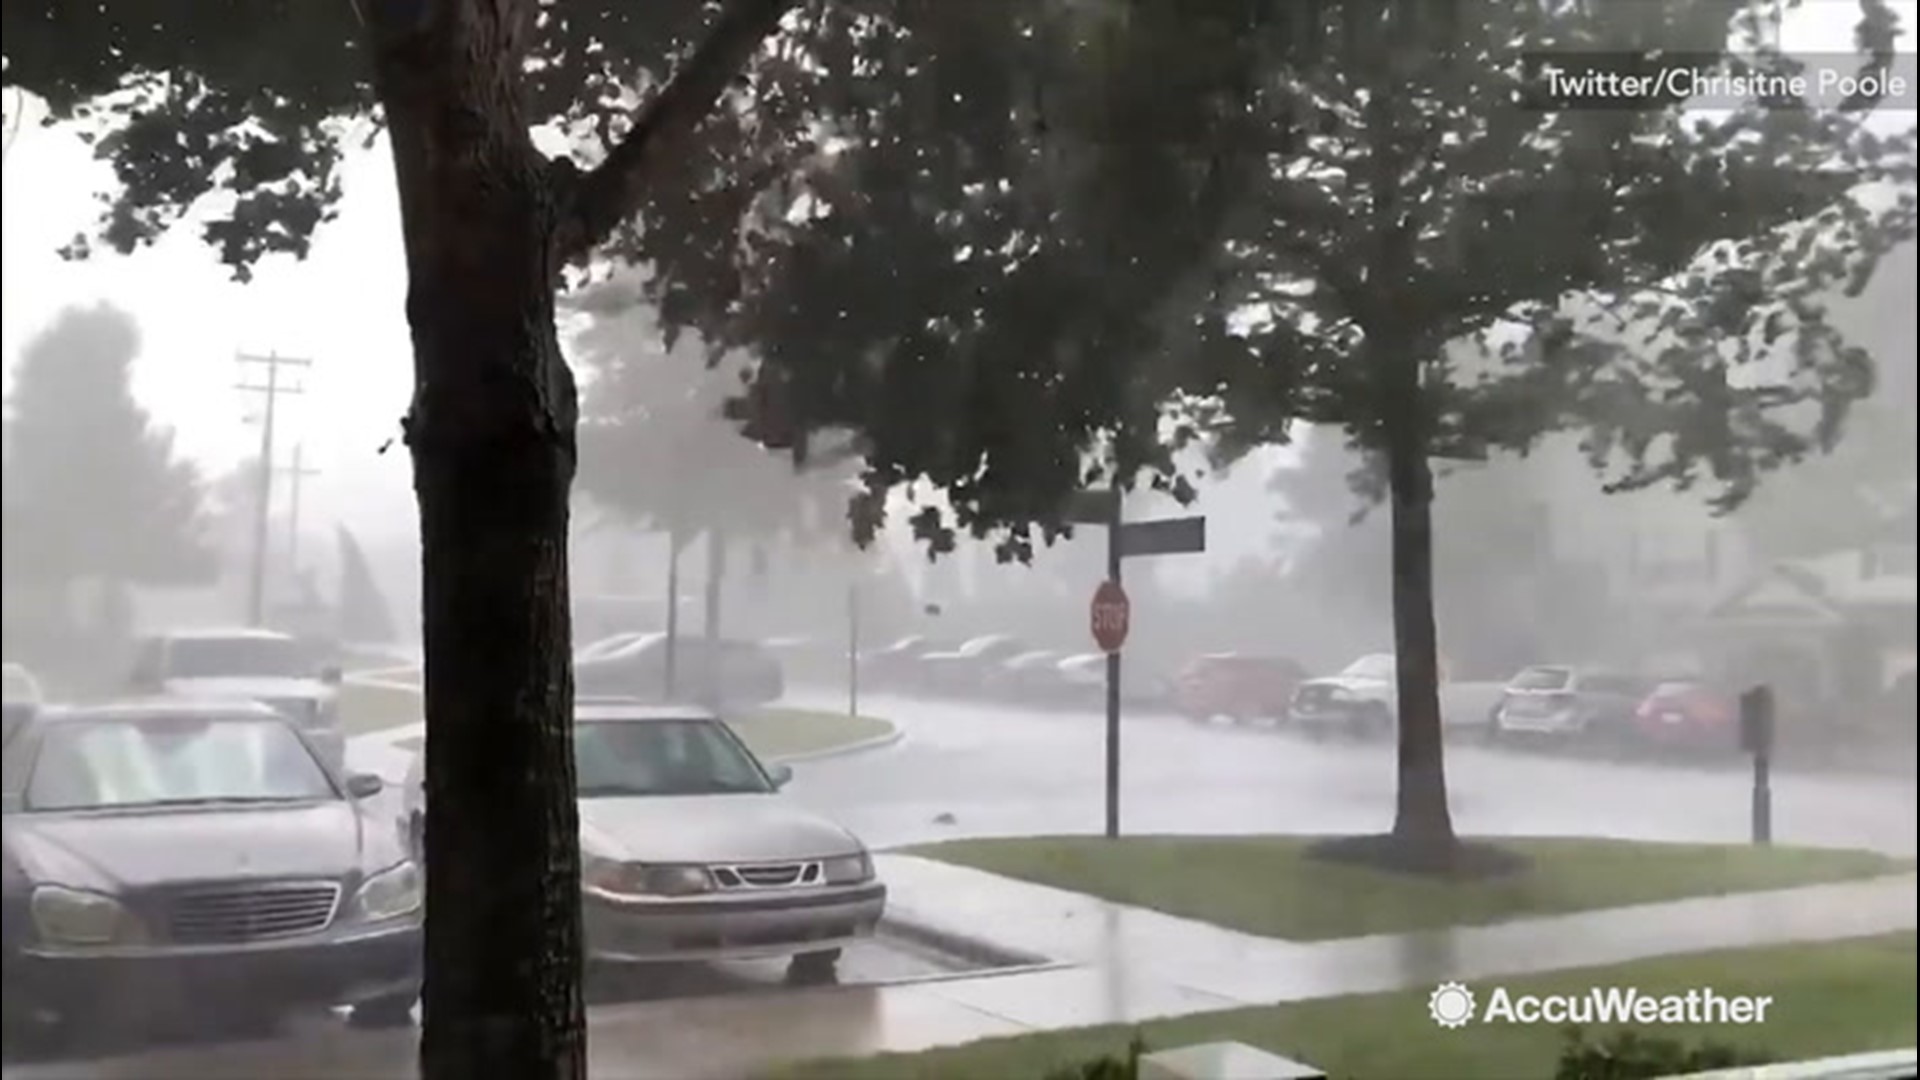 A storm passed through Kernersville, North Carolina, on Aug. 19, with intense winds rocking trees and signs around.